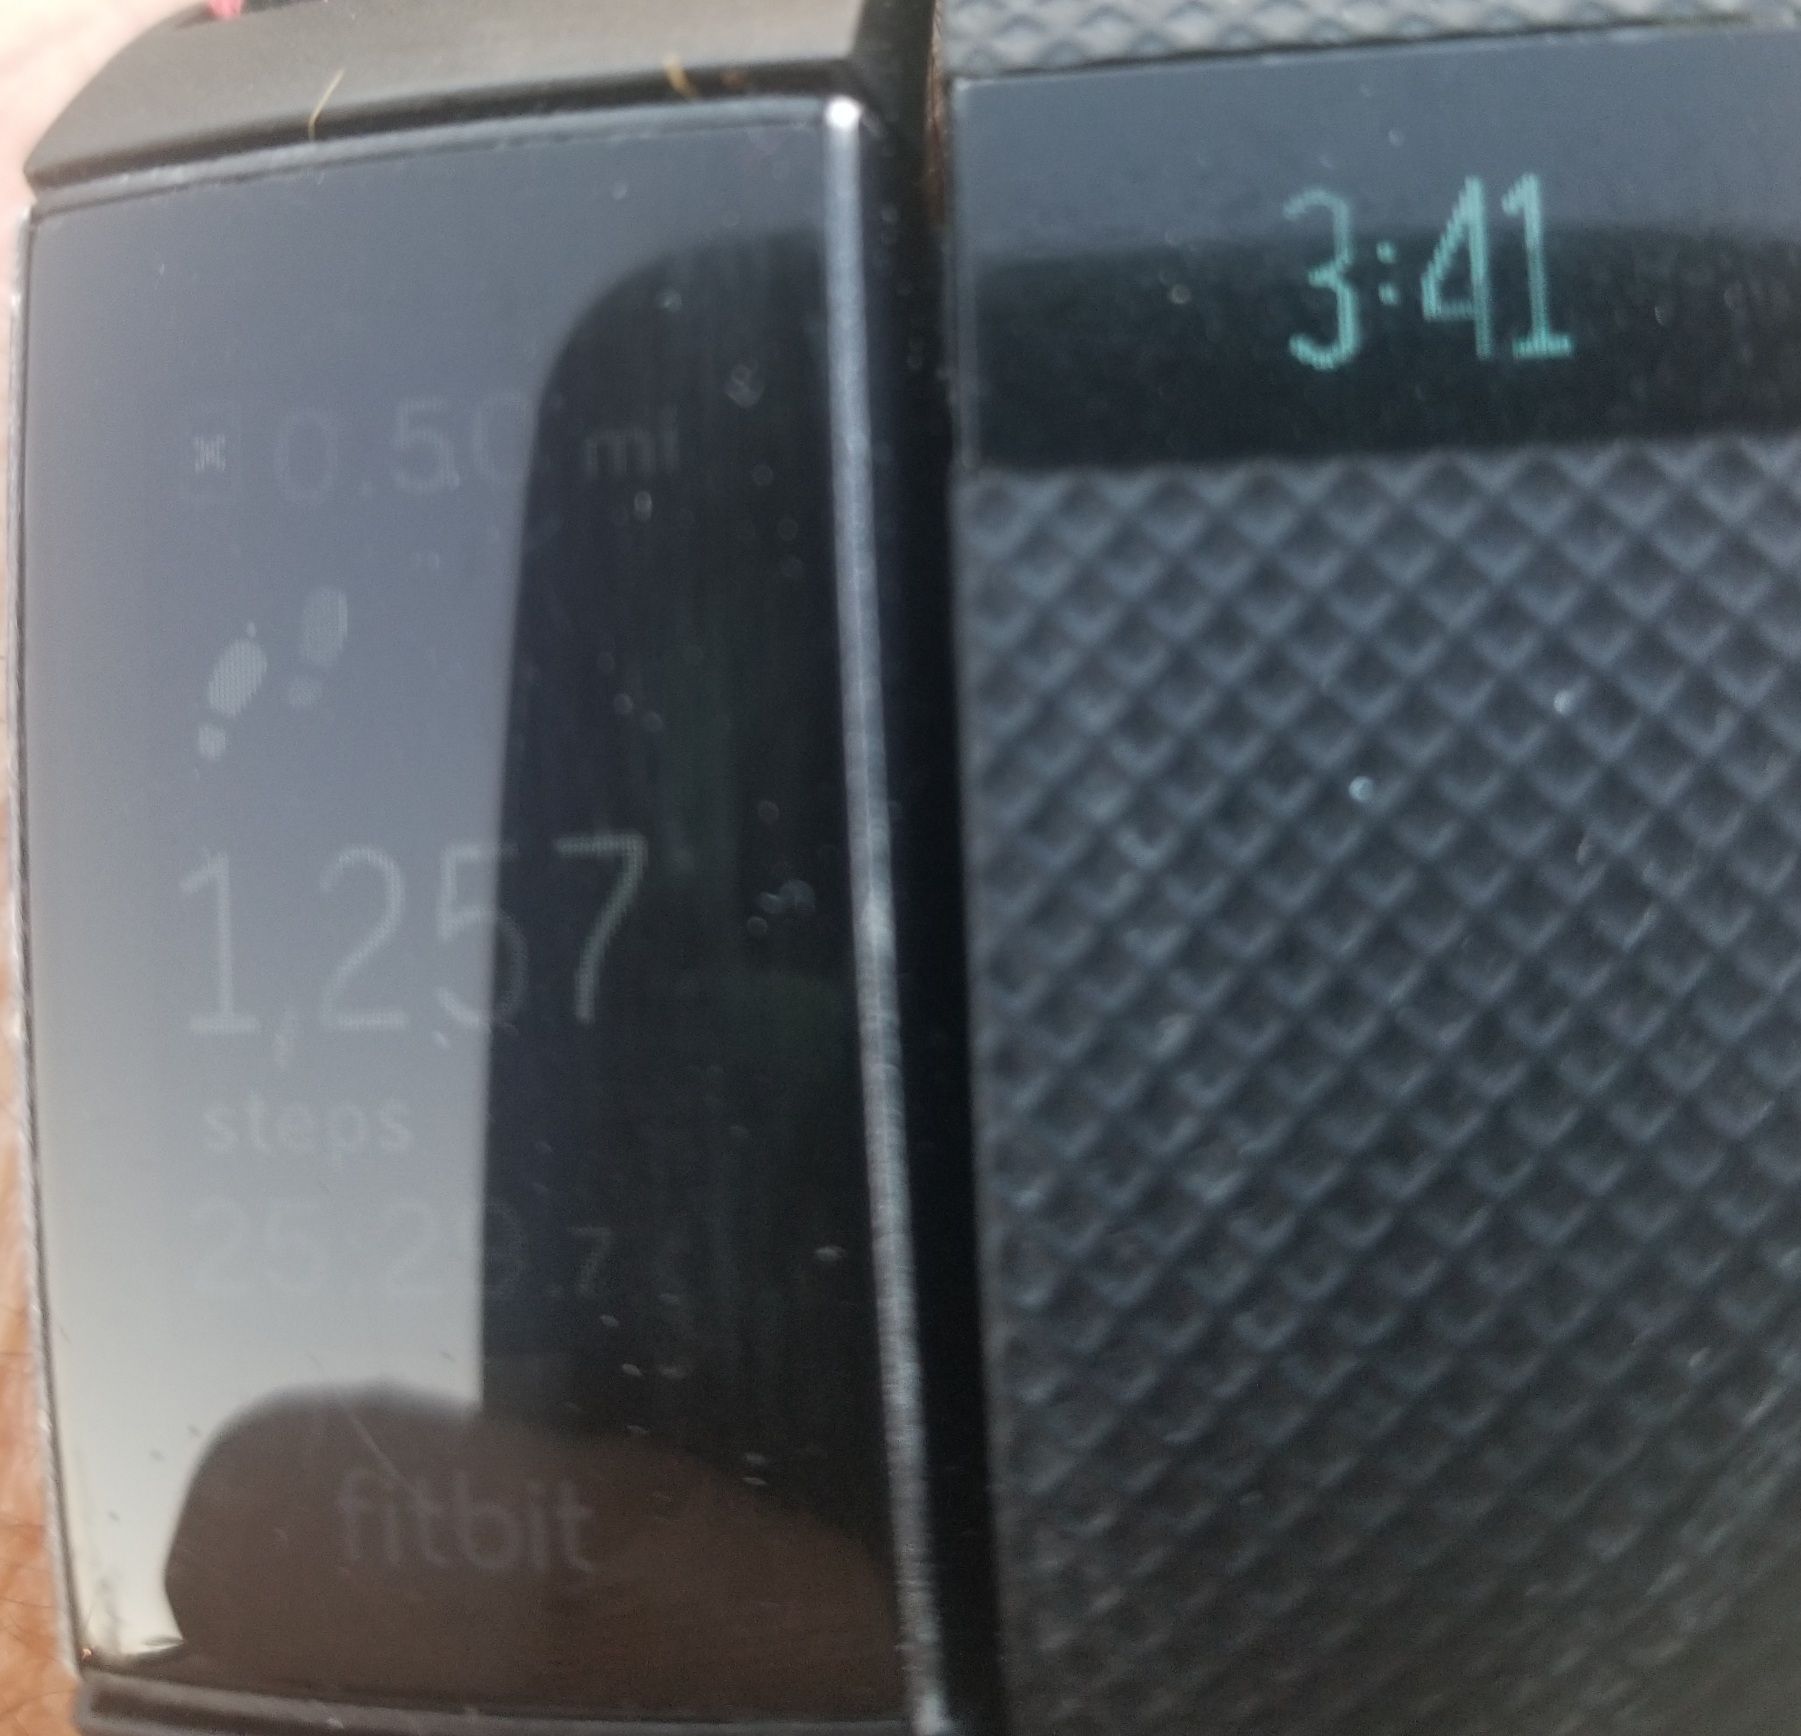 my fitbit charge 3 display is not working